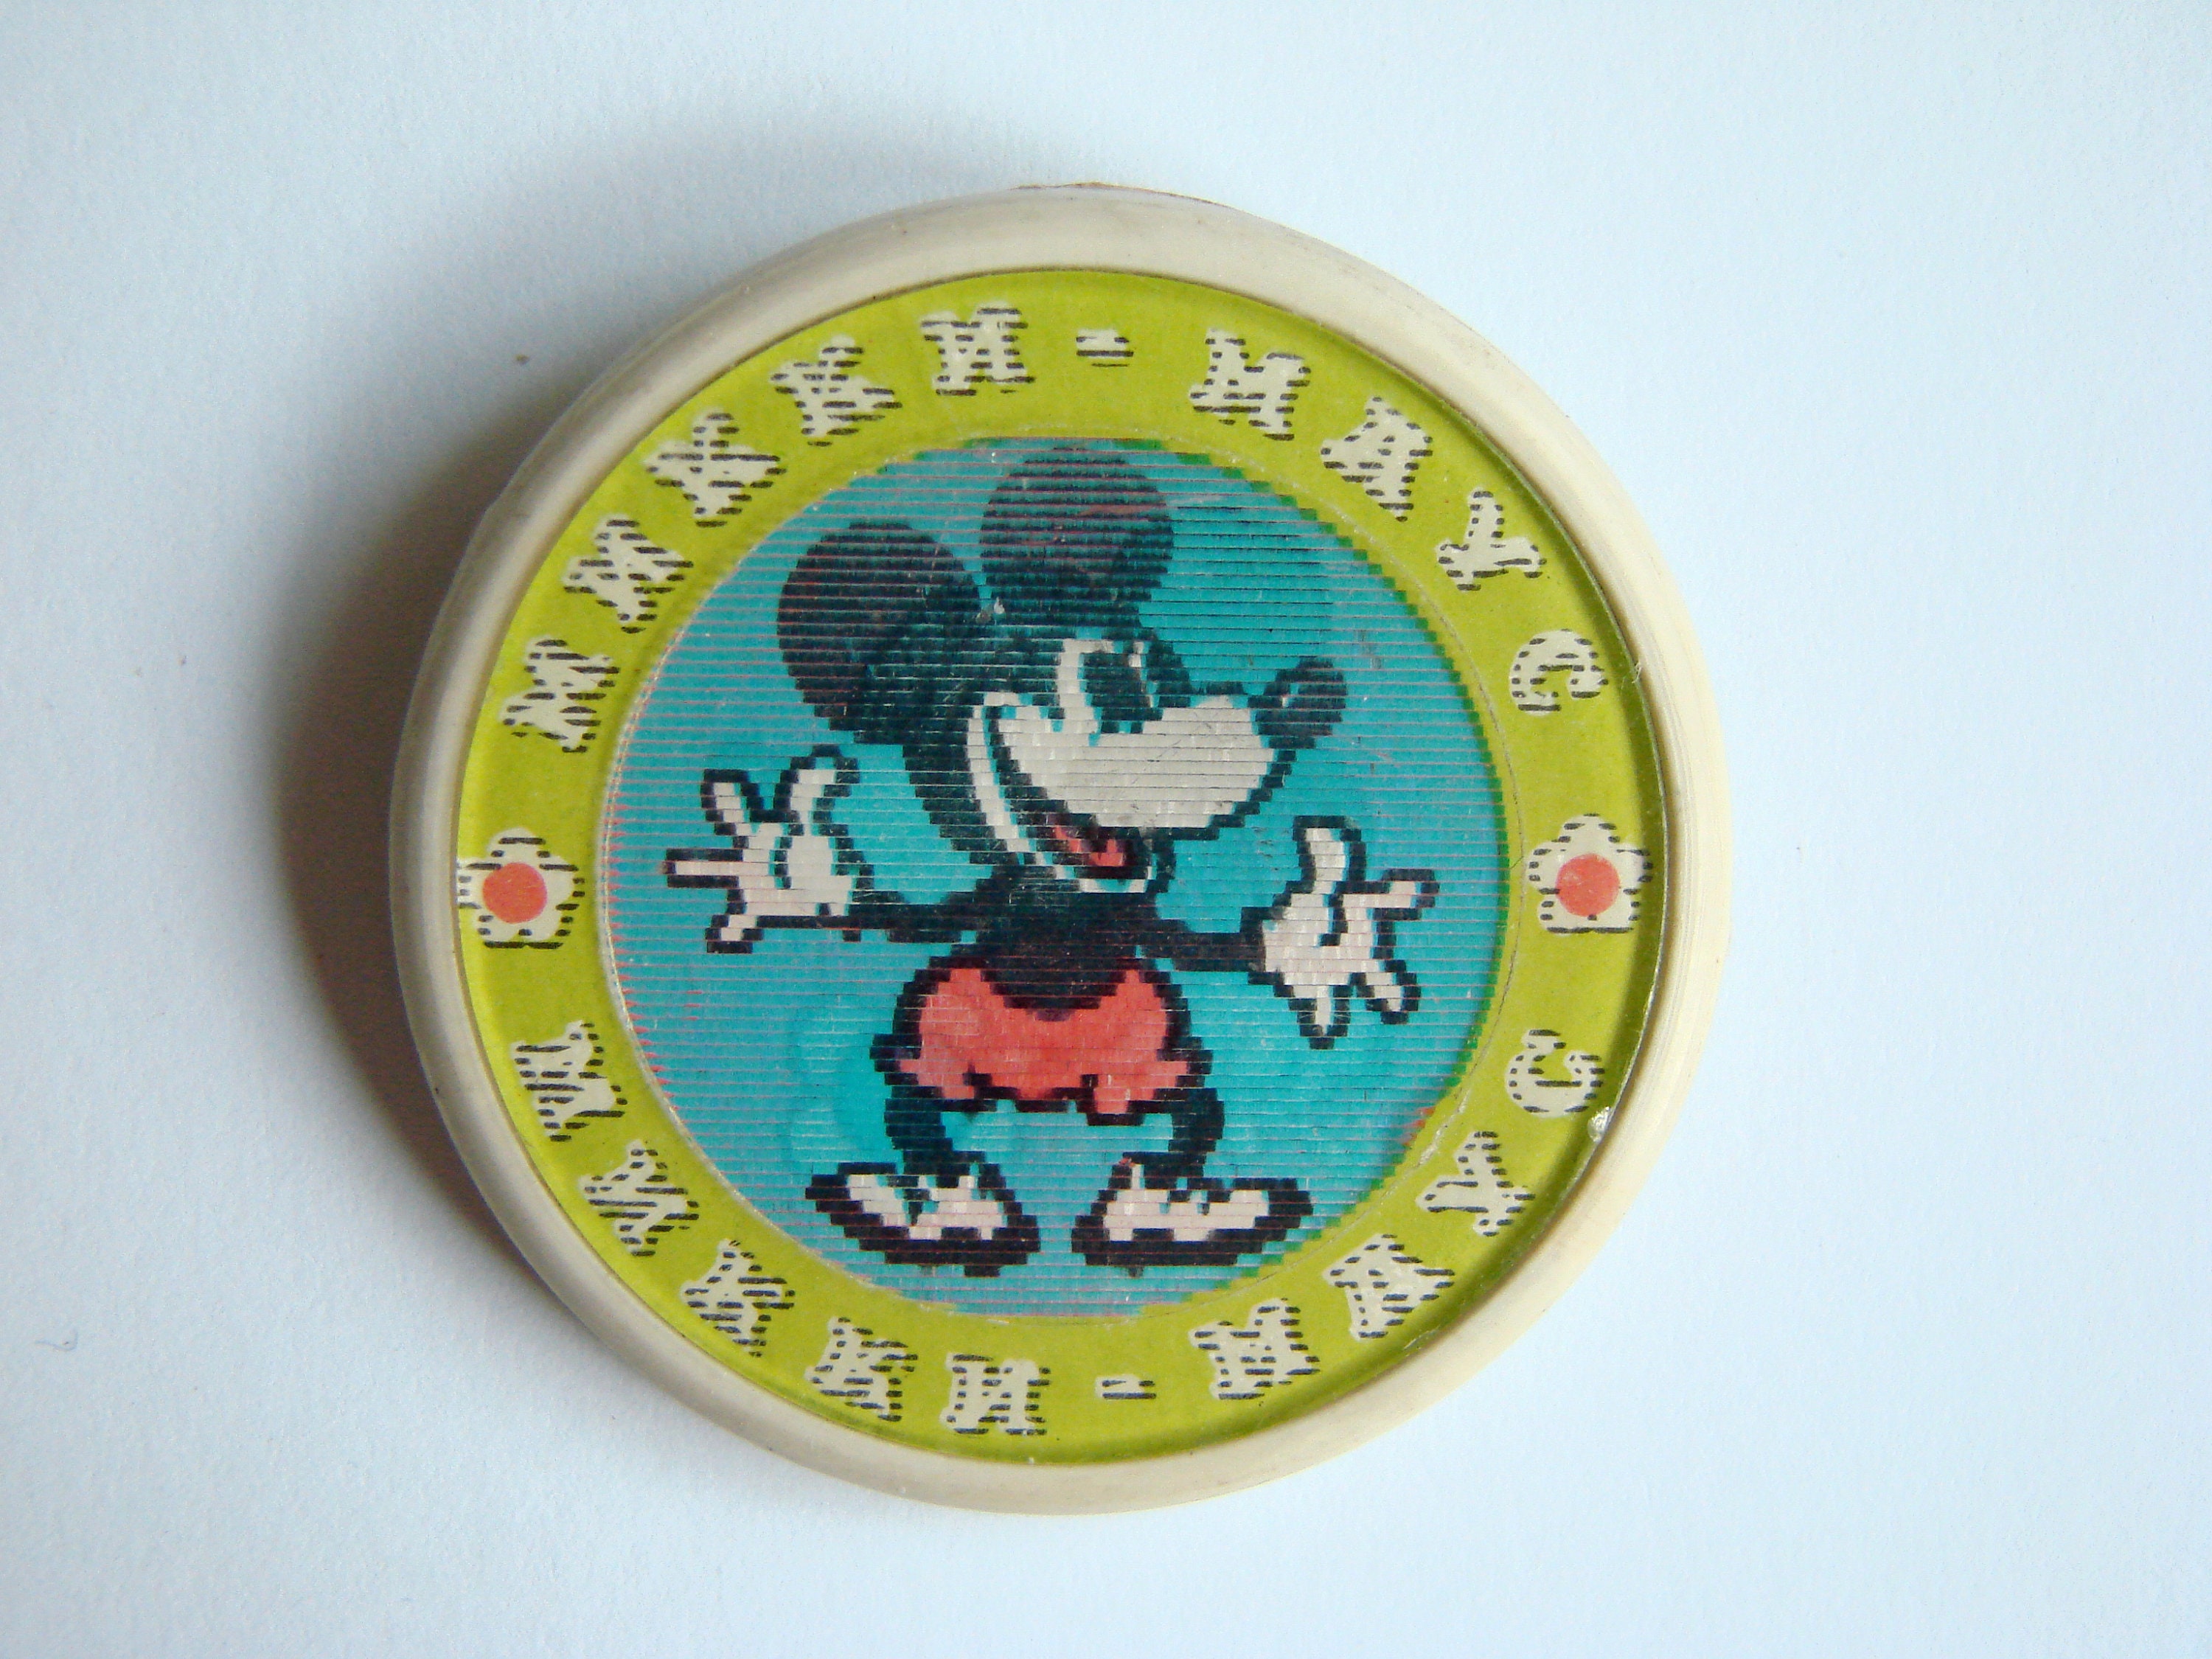 made in the USSR mouse 1970s. Vintage enamel children's pin badge